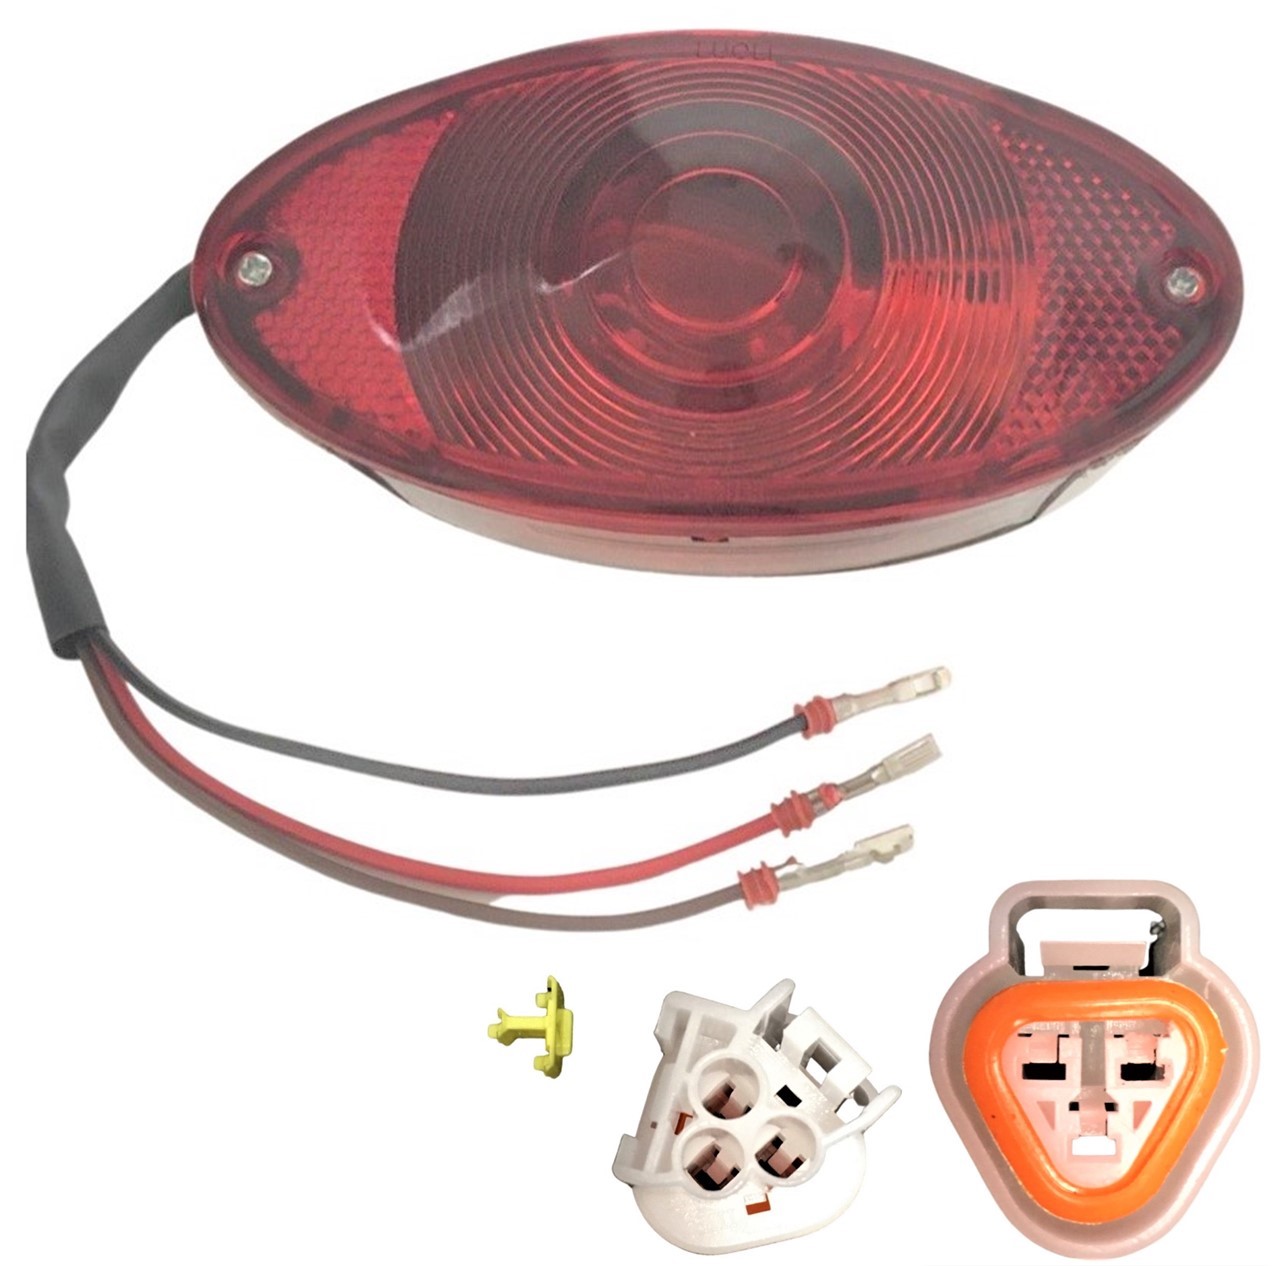 Tail Light (GoKart) Fits Many Chinese GoKarts W=128 H=65 Bolts c/c=49 3 Pins in 3 Pin Female Jack Comes with the wiring housing shown in our picture. You will need to put the wires in the housing.